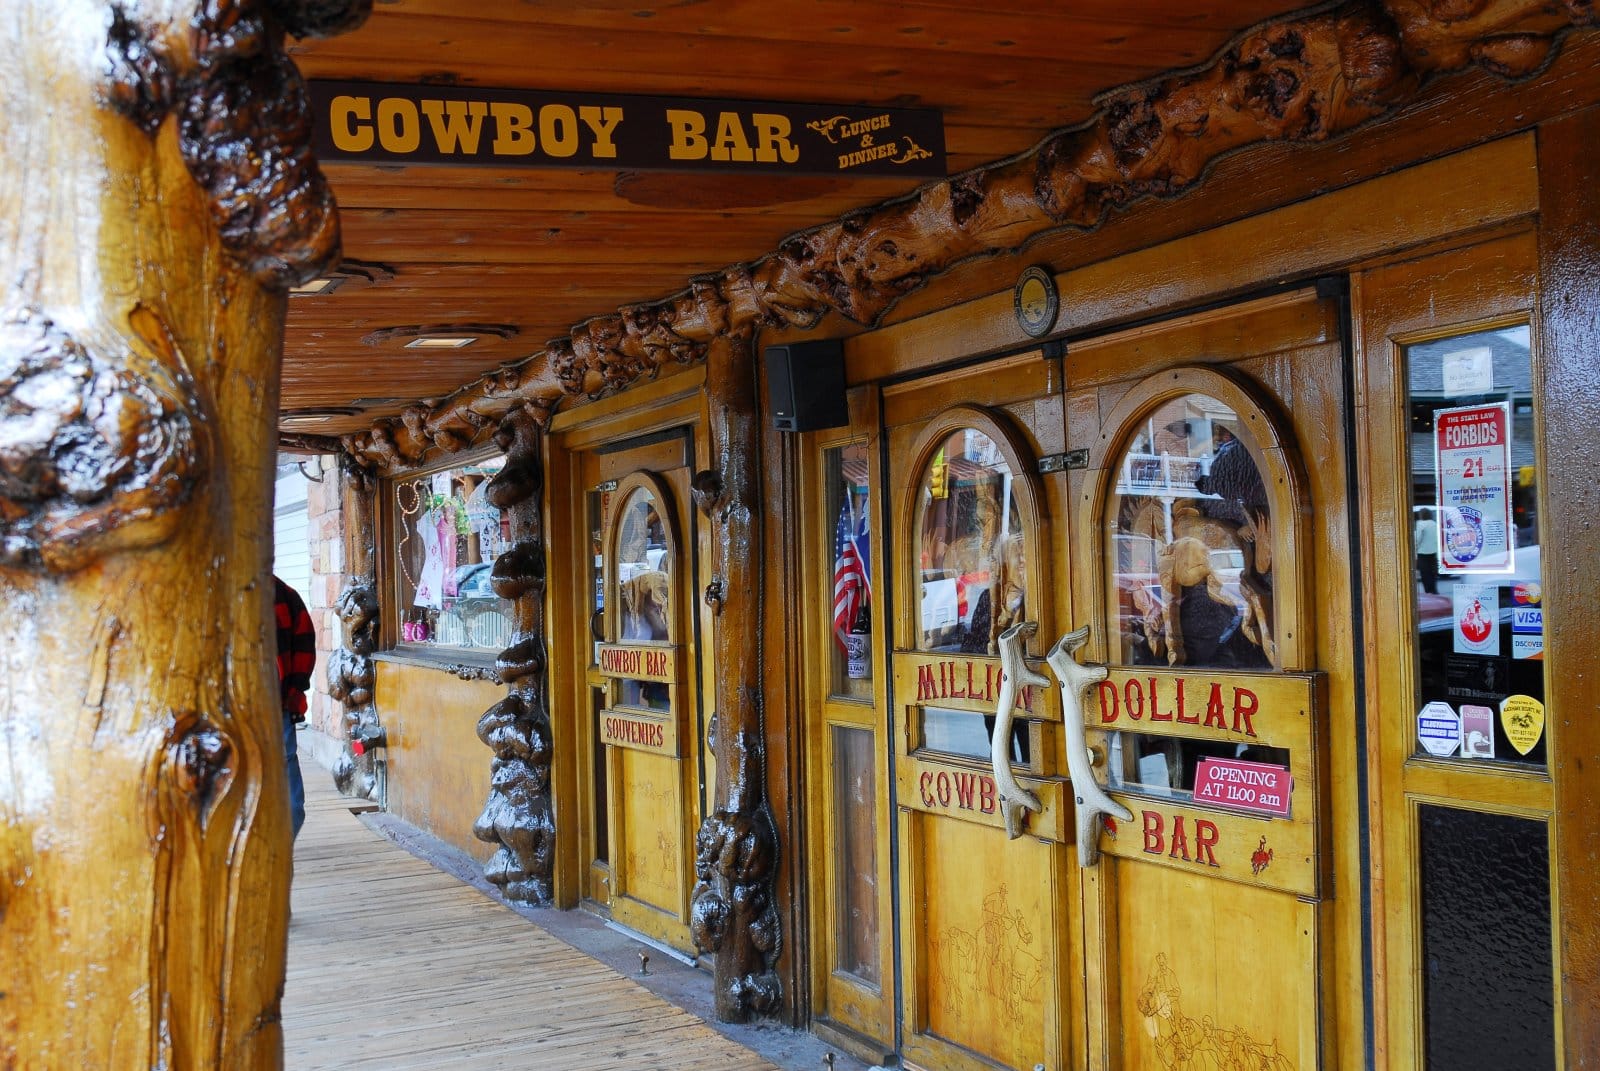 <p class="wp-caption-text">Image Credit: Shutterstock / Cenz07</p>  <p>A unique watering hole where saddles serve as bar stools and Western memorabilia lines the walls. It’s a taste of cowboy culture with a side of kitsch.</p>